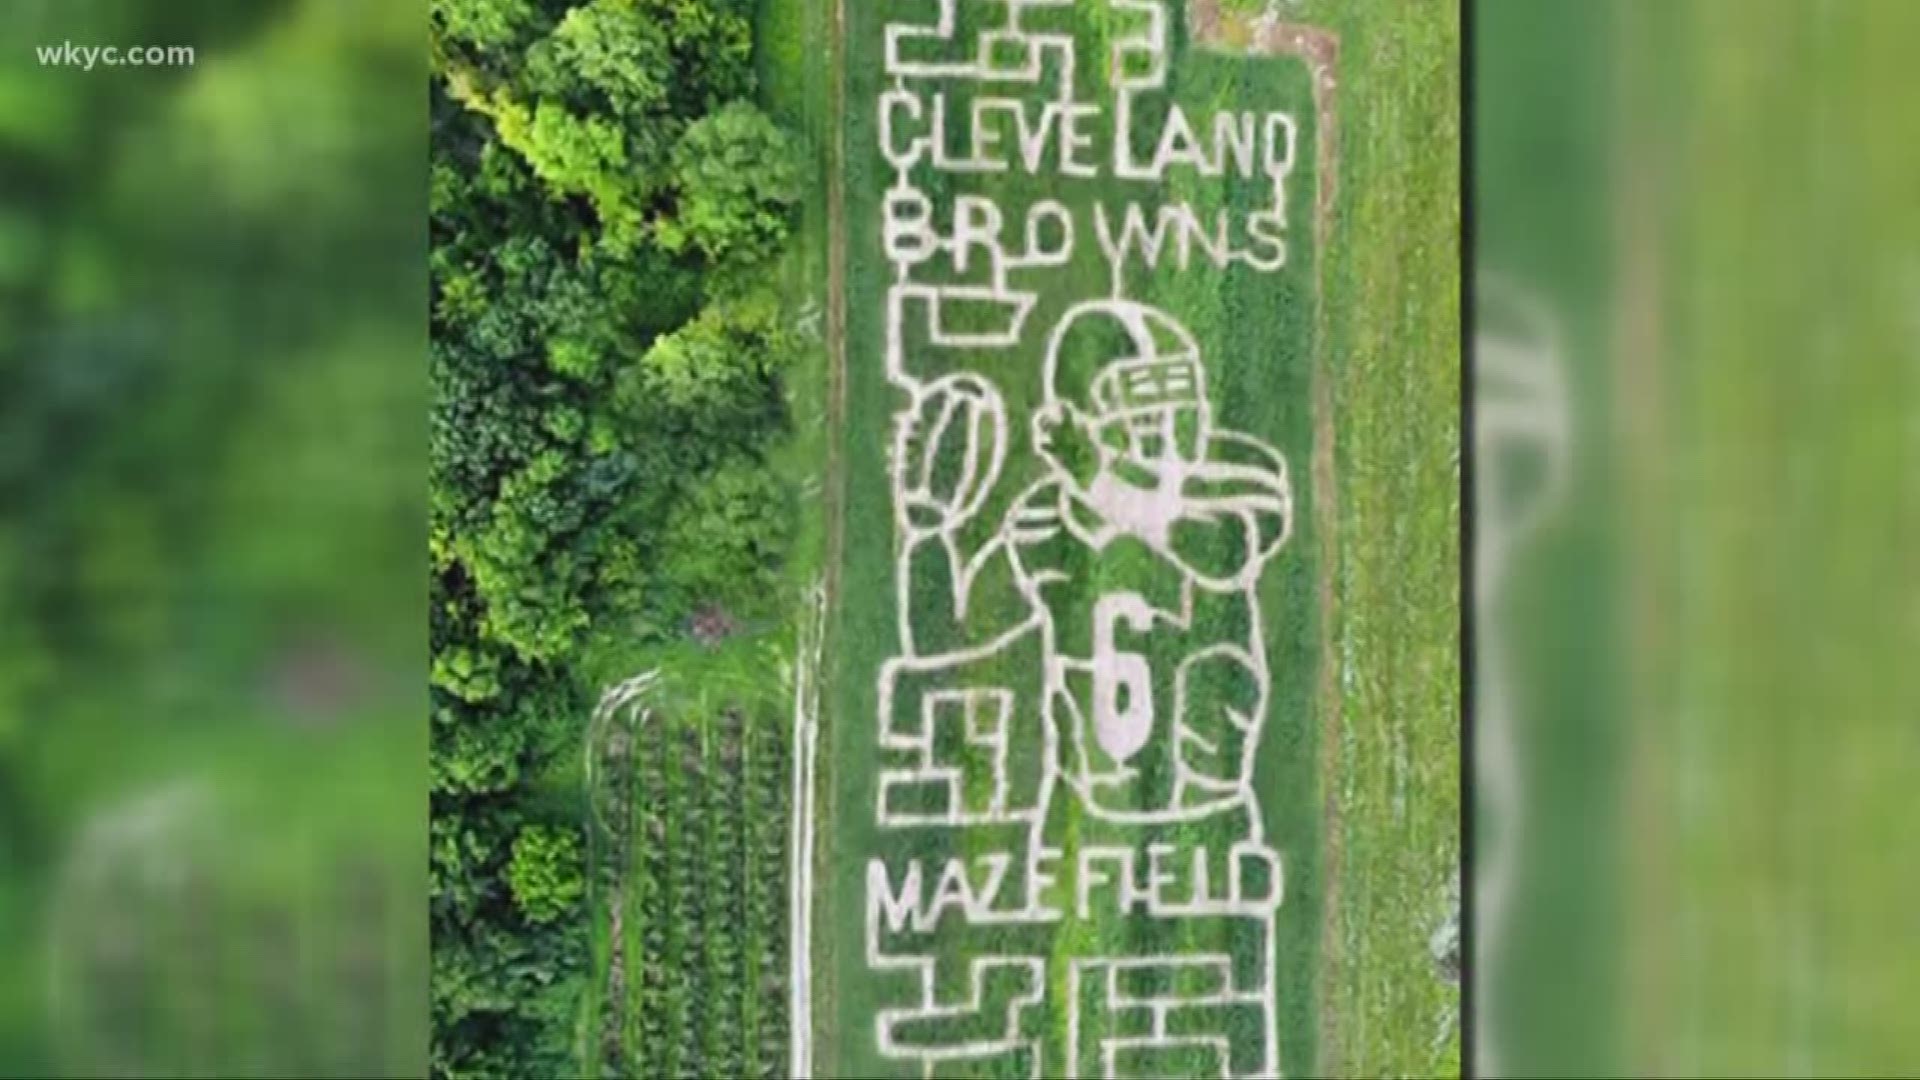 On Tuesday, the popular farm located in Brunswick unveiled its new corn maze: "The Mazefield," which pays homage to Cleveland Browns quarterback Baker Mayfield.